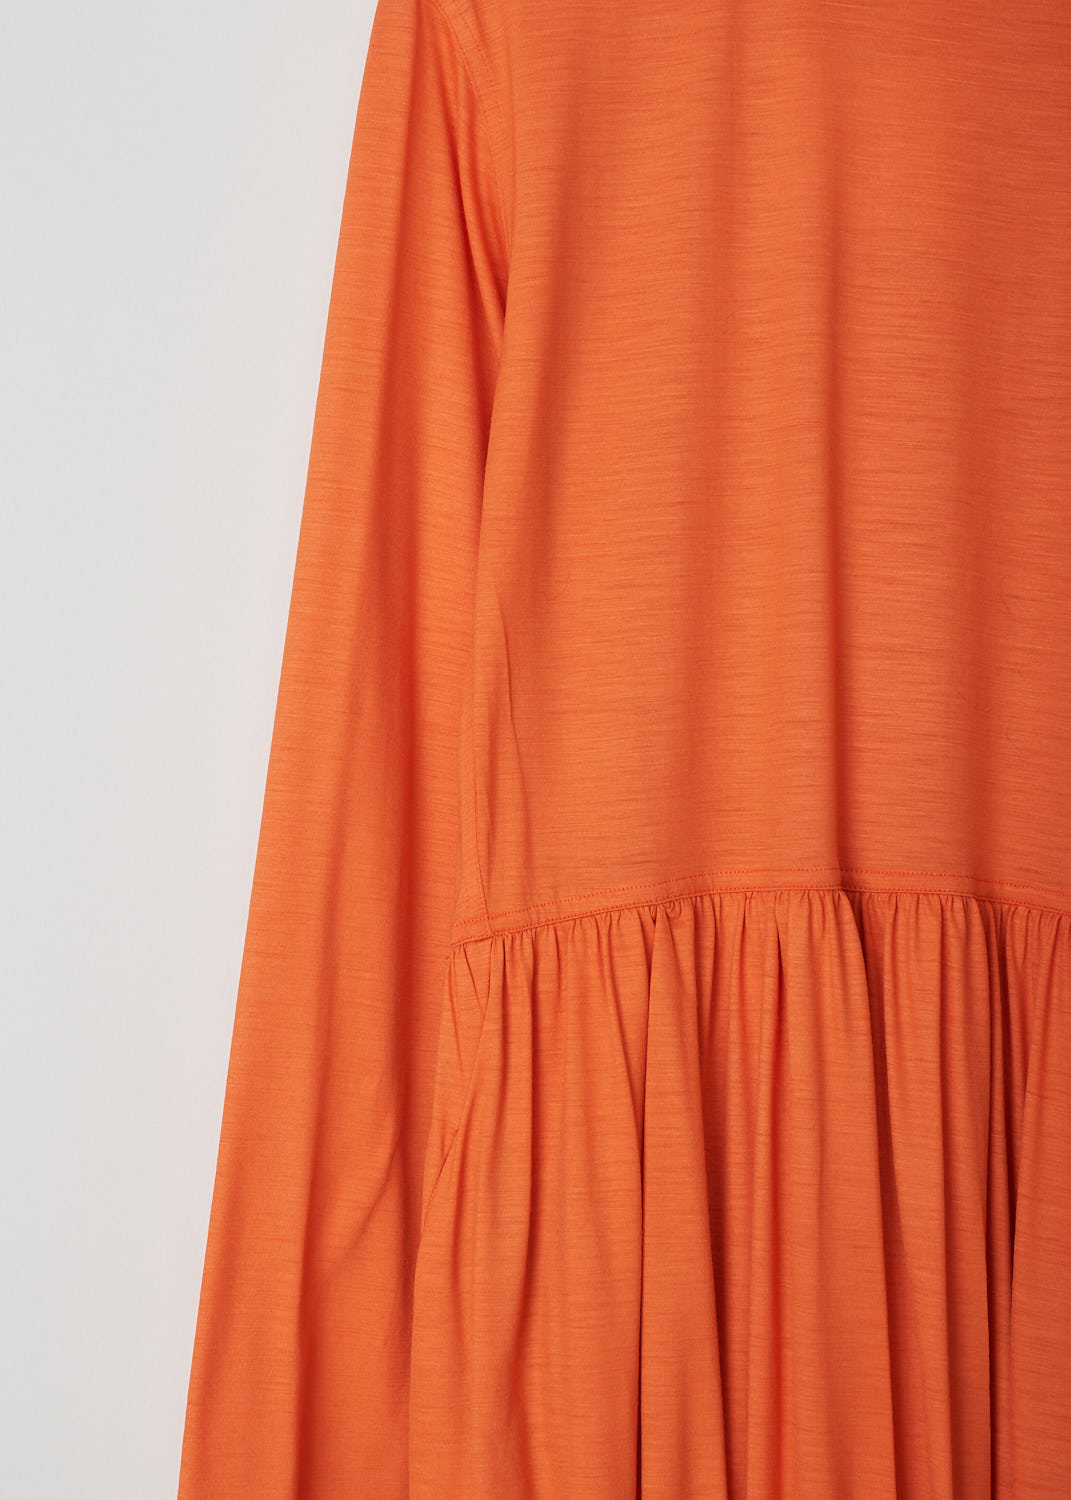 SOFIE D’HOORE, ORANGE LONG SLEEVE DRESS, DEMURE_WOJE_PAPAYA, Orange, Detail, This orange mid-length dress features a round neckline, a plain long sleeve bodice and a twisted balloon skirt. A single side pocket can be found concealed in the seam. 
